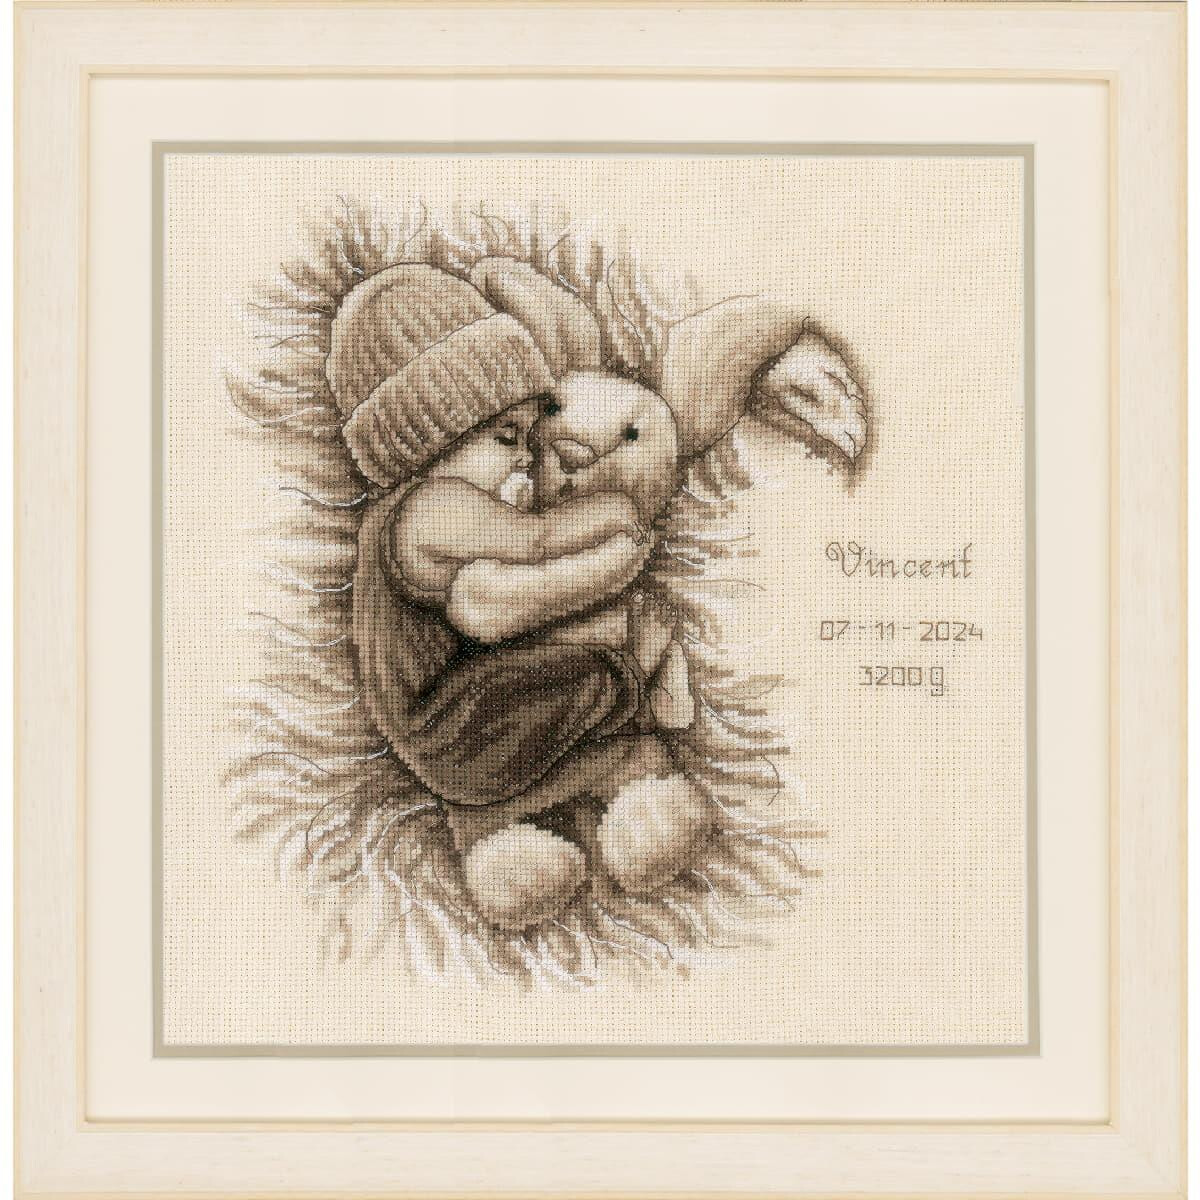 Vervaco counted cross stitch kit "Baby with cuddly...